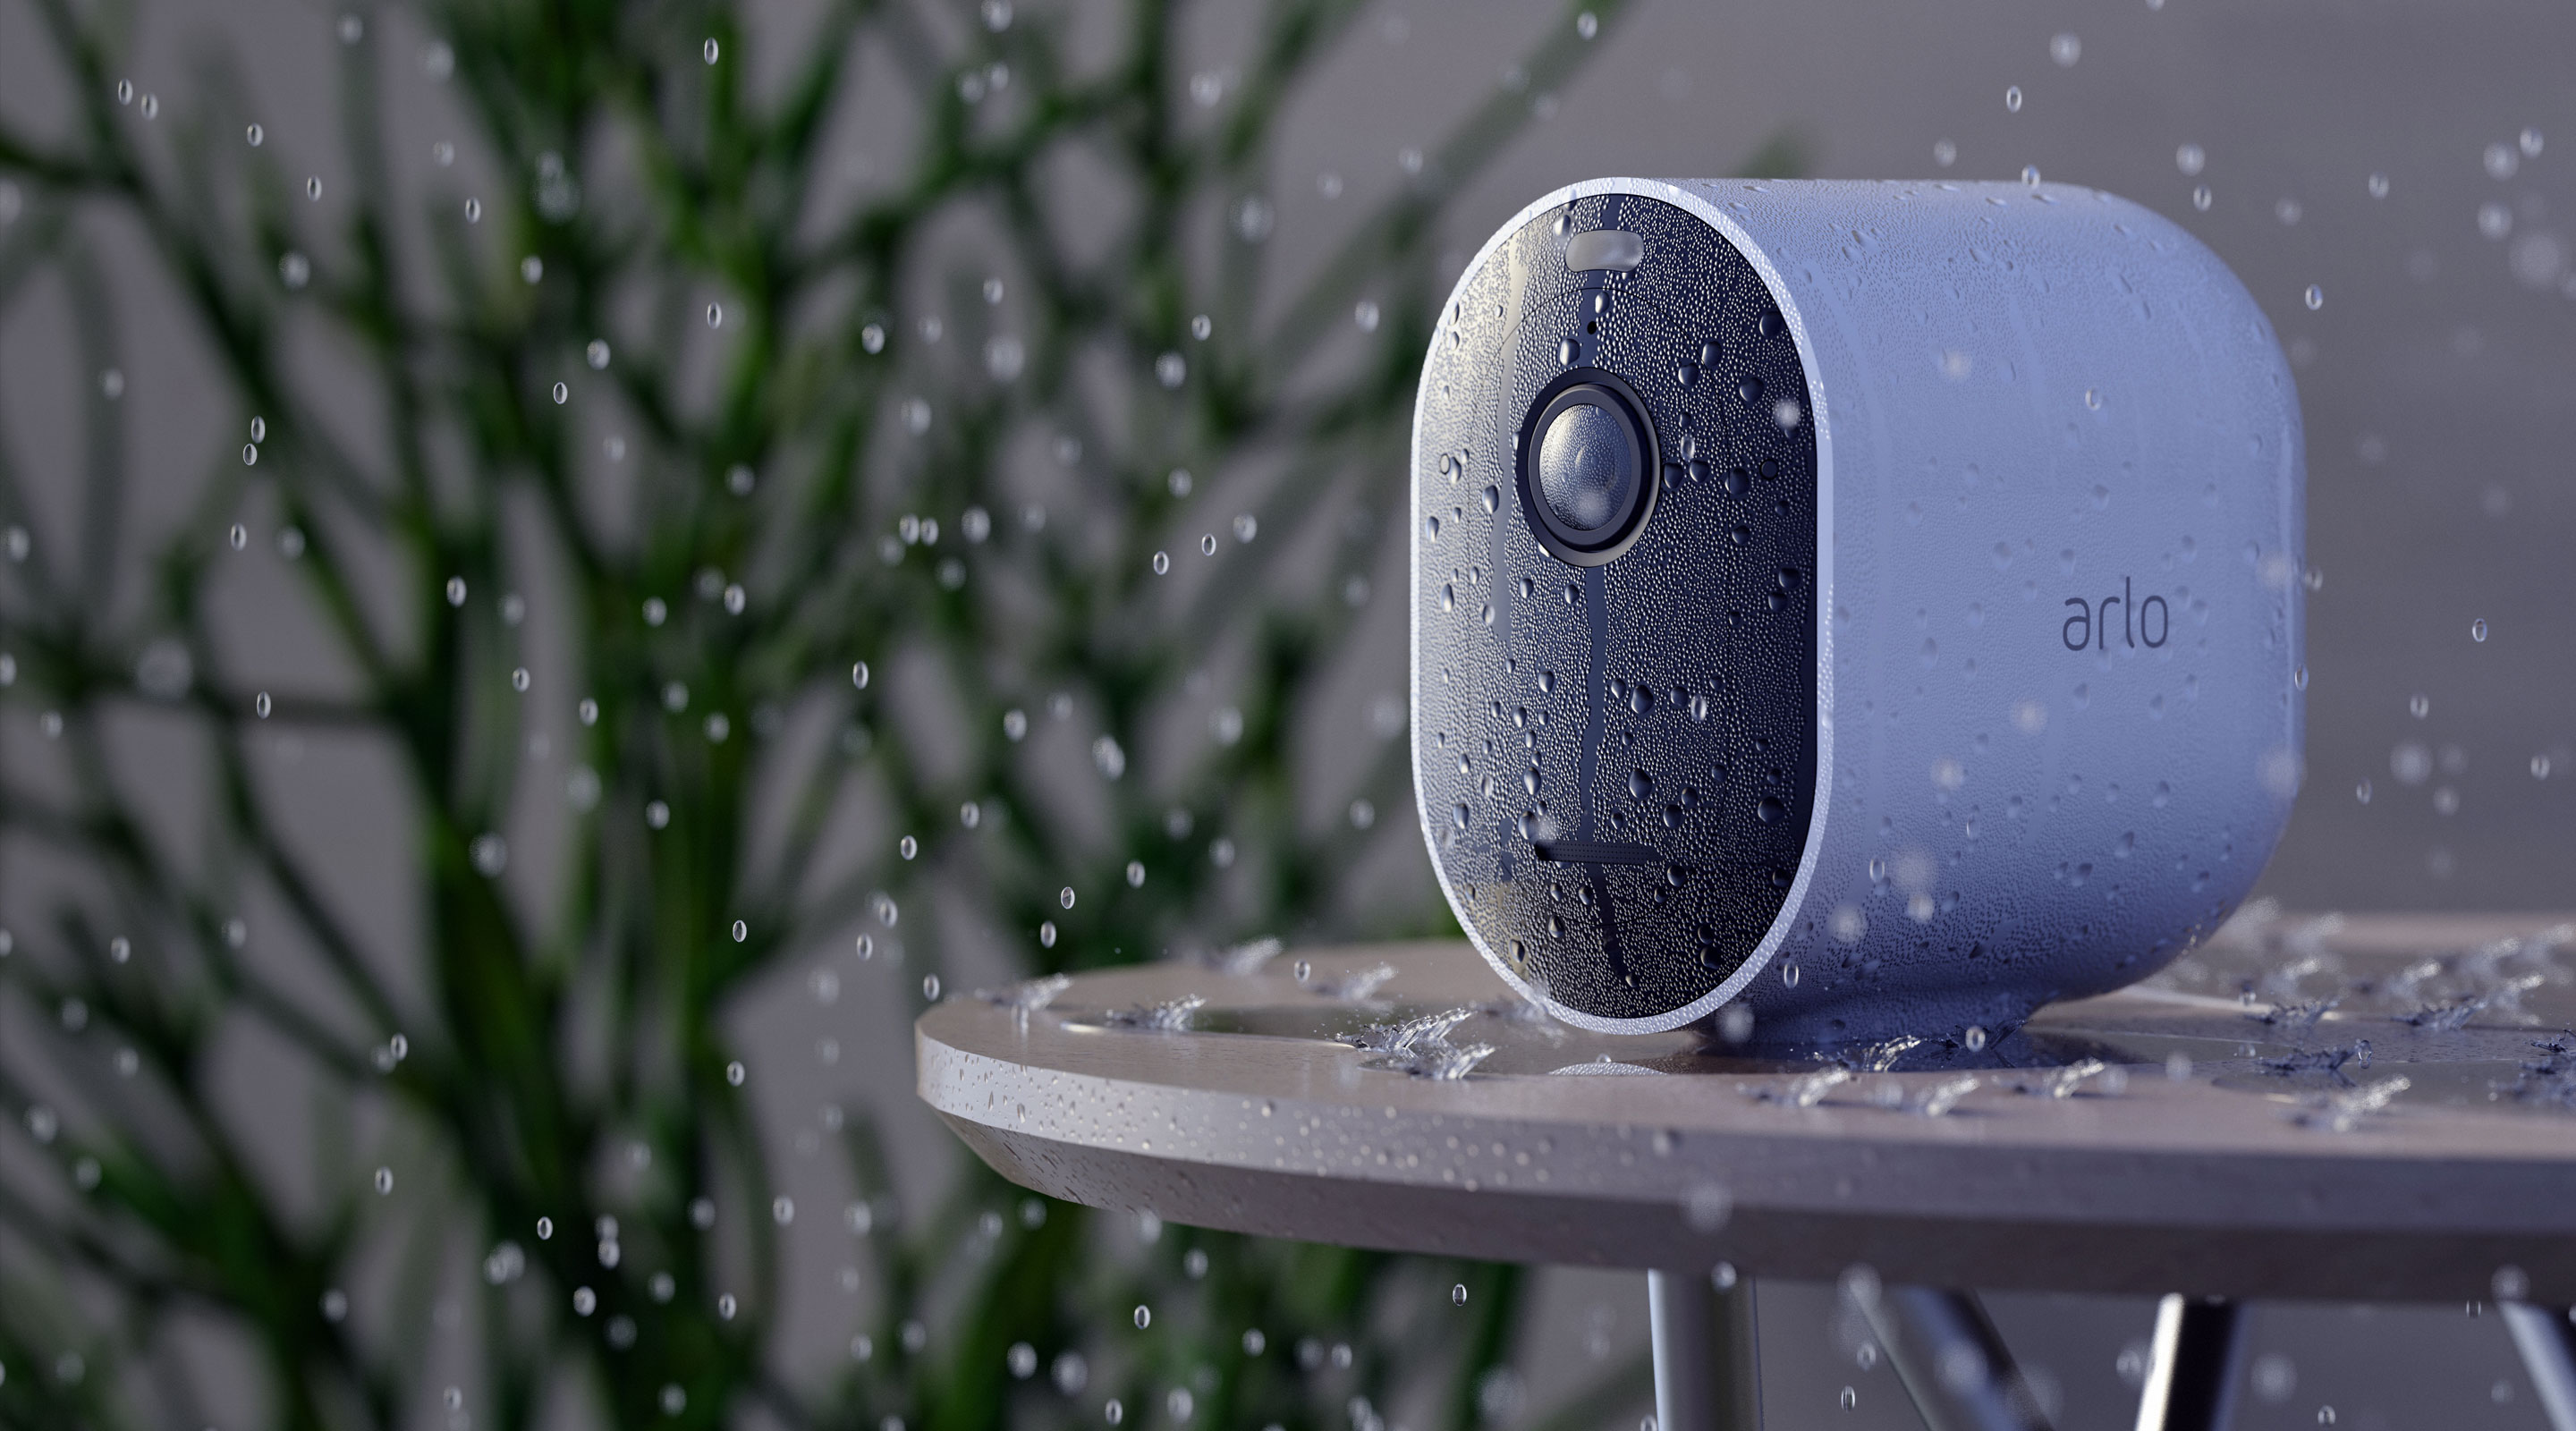 Arlo Pro 4 camera displayed on table outside in rain with water droplets